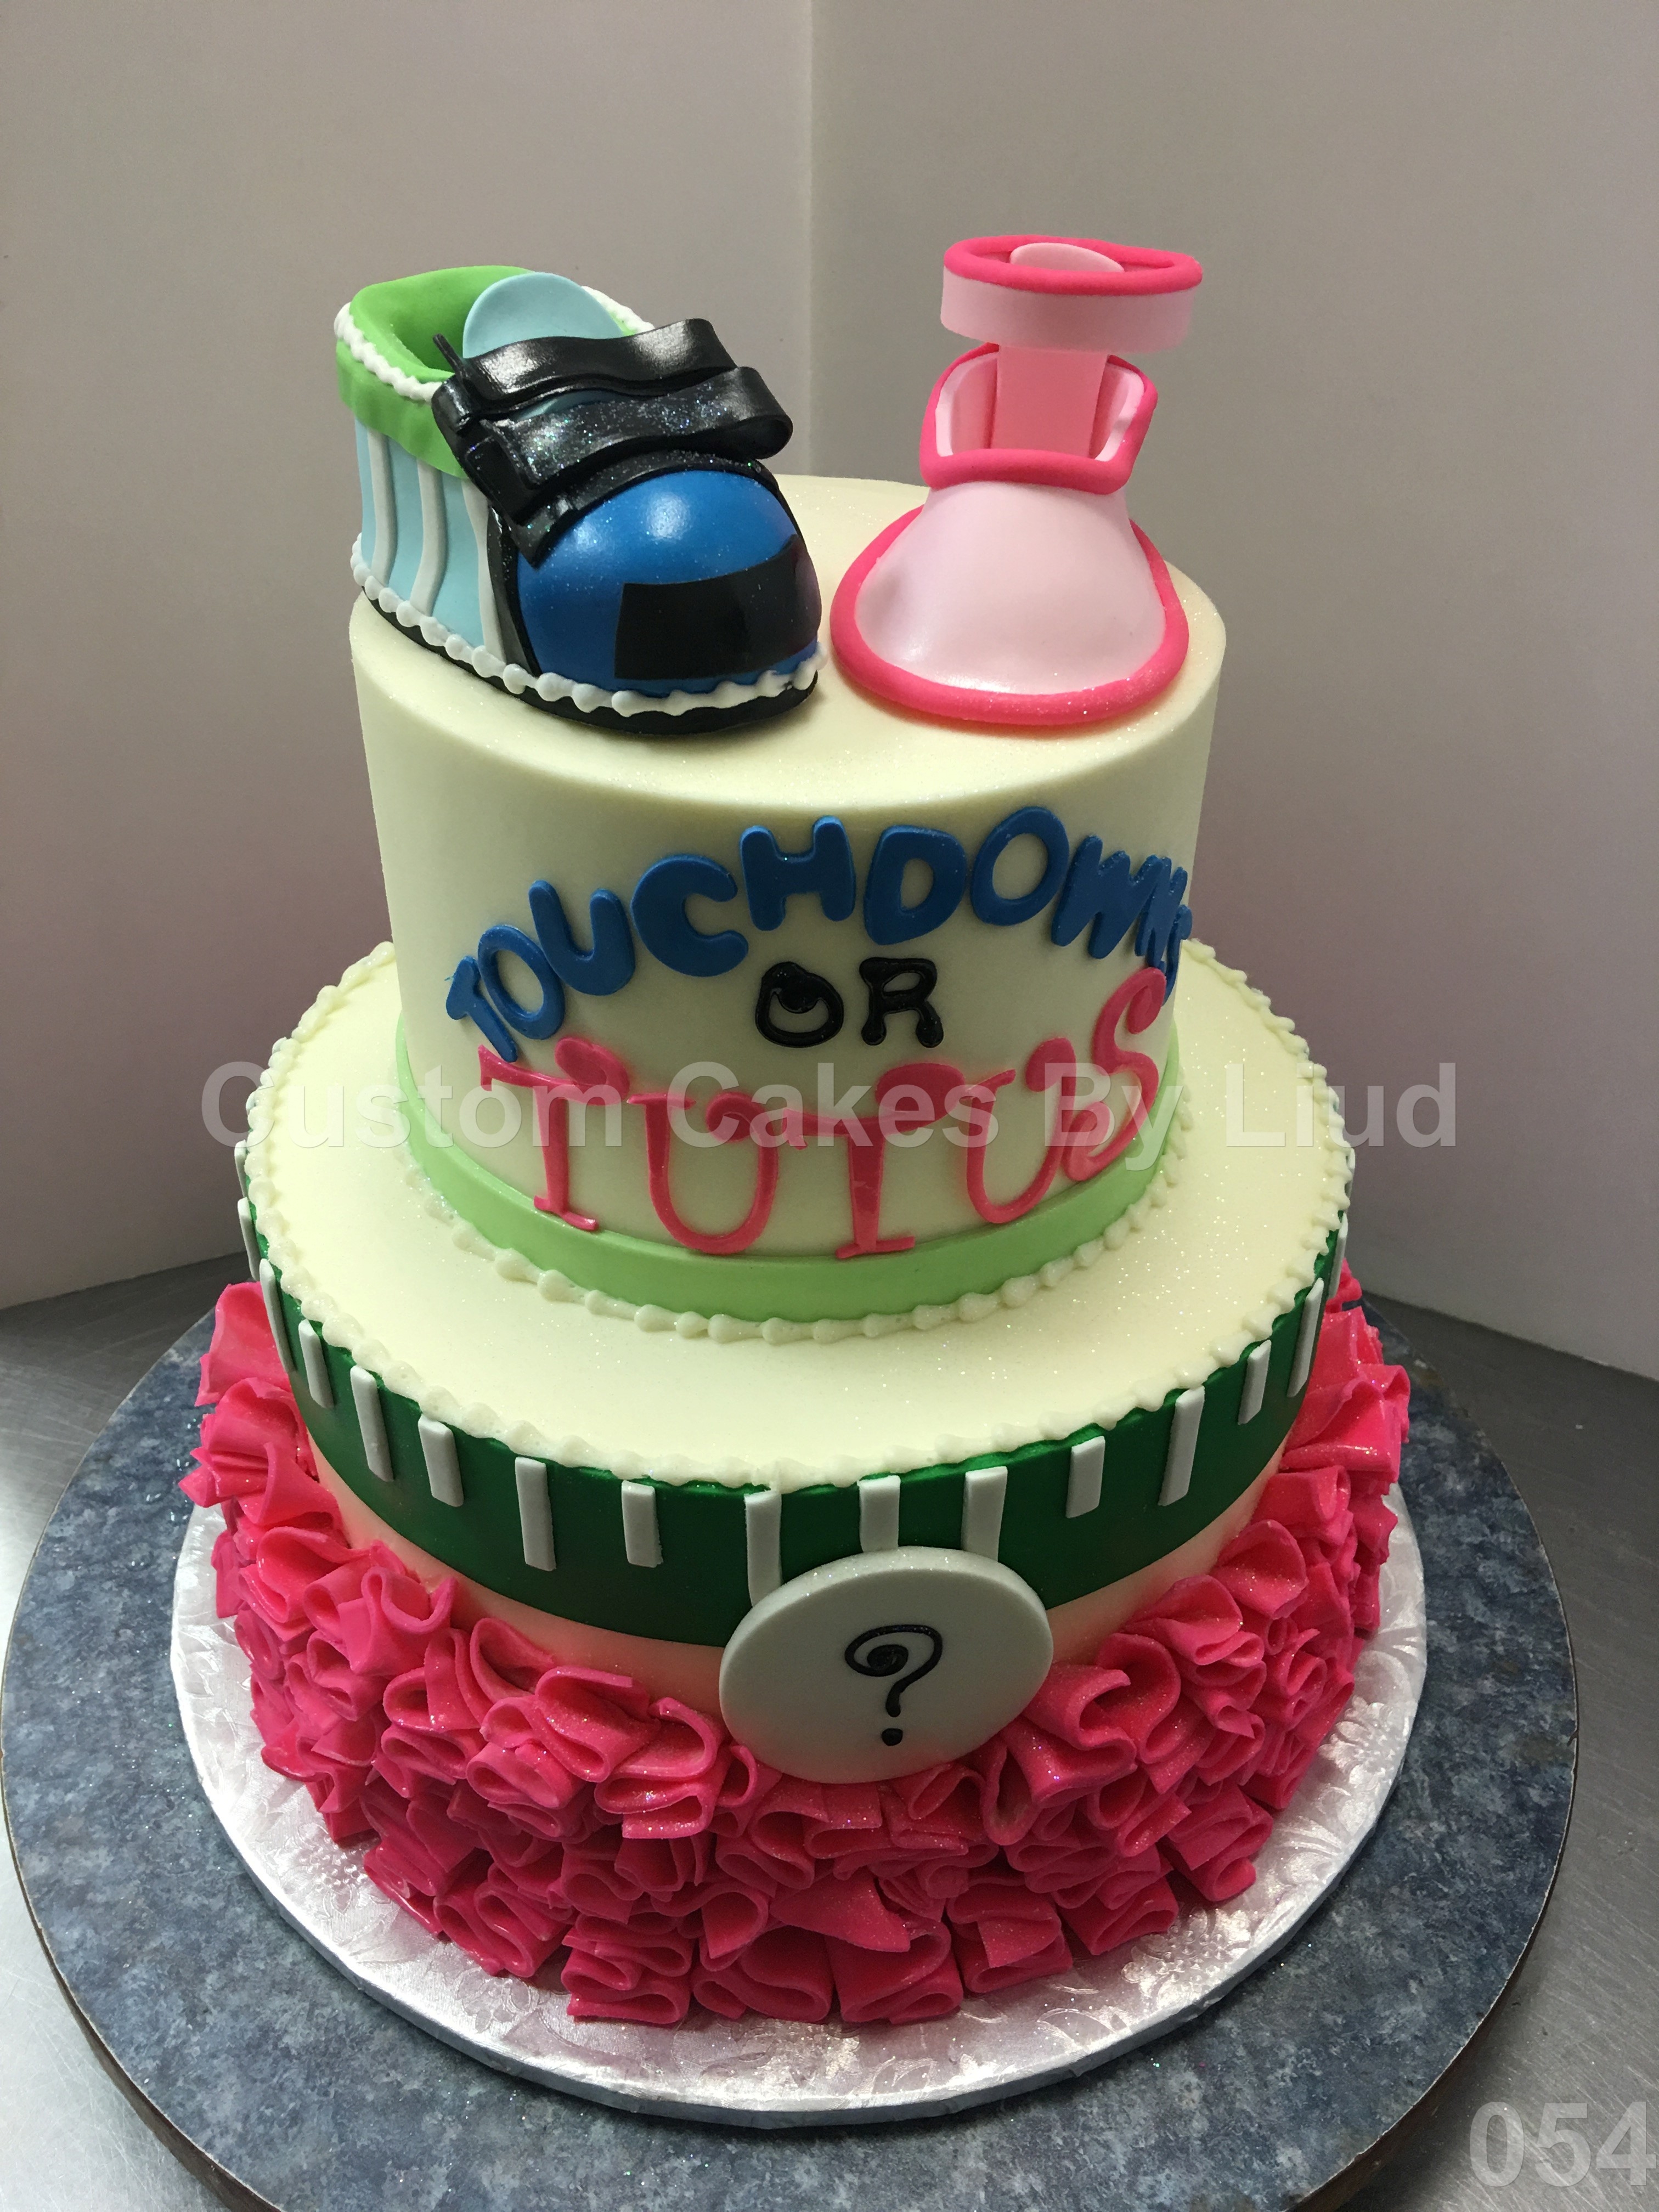 Custom Cakes by Liud Coupons near me in Roswell | 8coupons